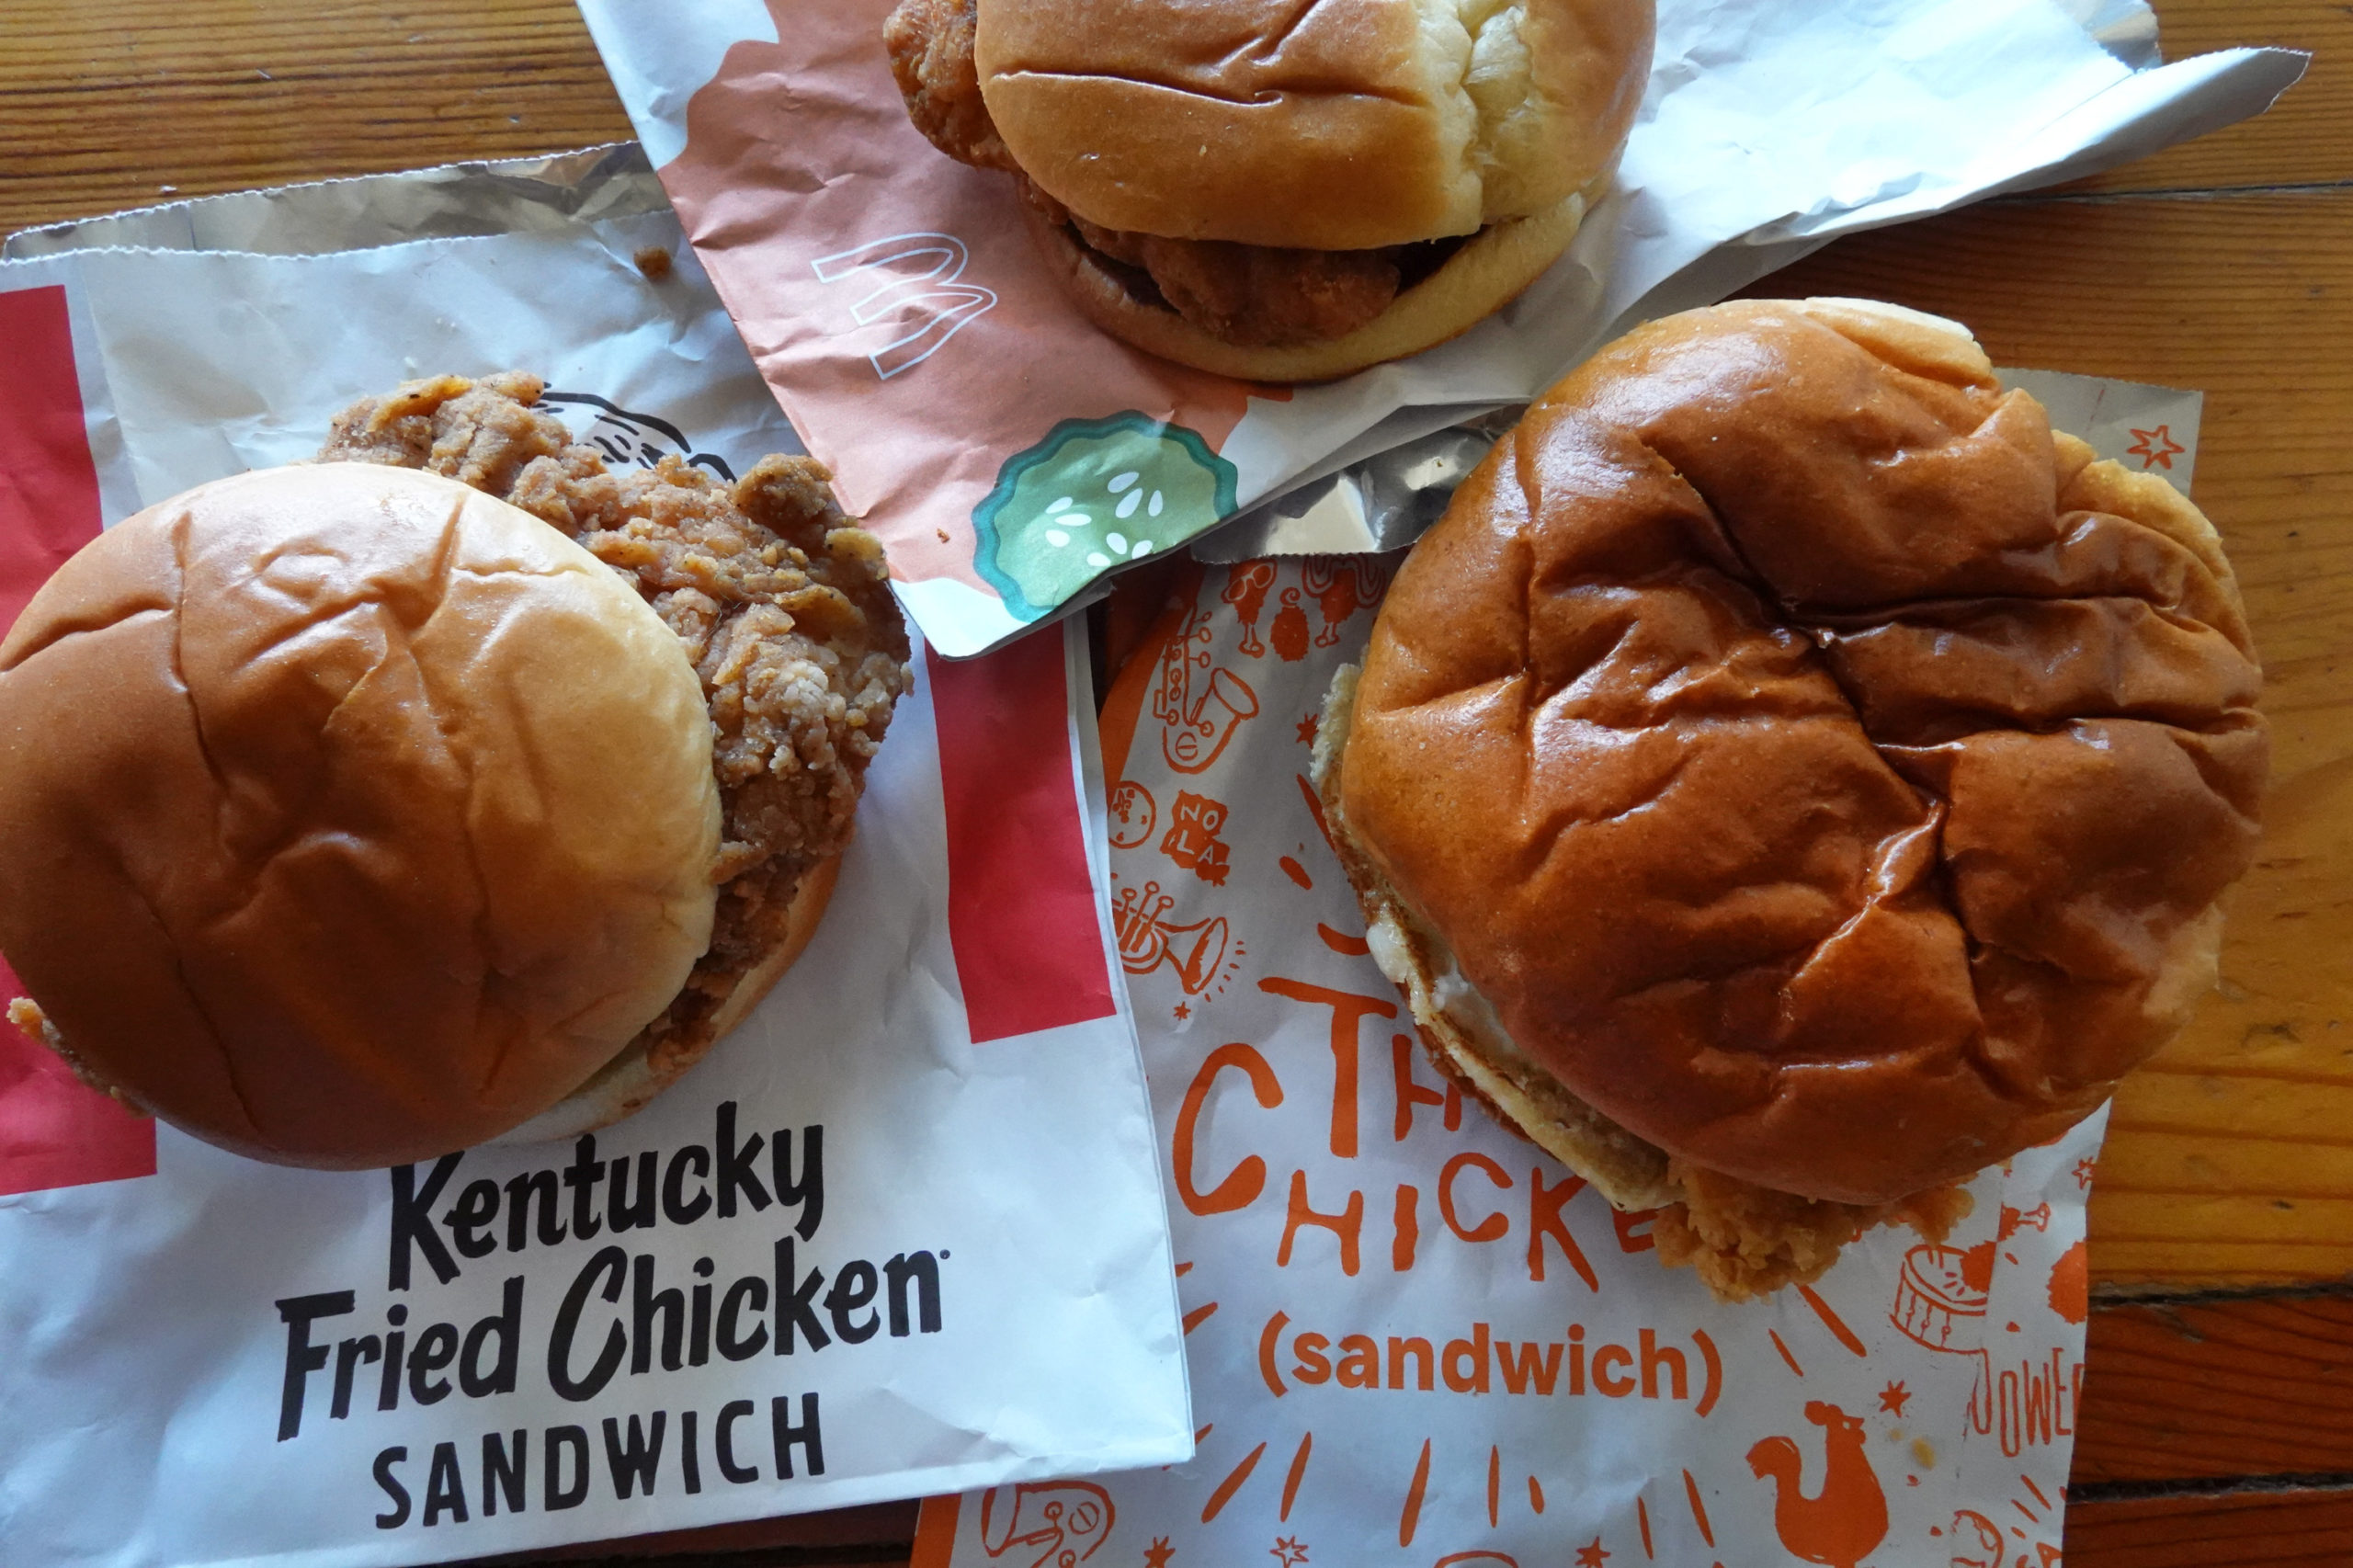 Fast-food chicken sandwiches from McDonald's, Popeyes Louisiana Kitchen and KFC are shown on May 06, 2021 in Chicago, Illinois. (Photo Illustration by Scott Olson/Getty Images)